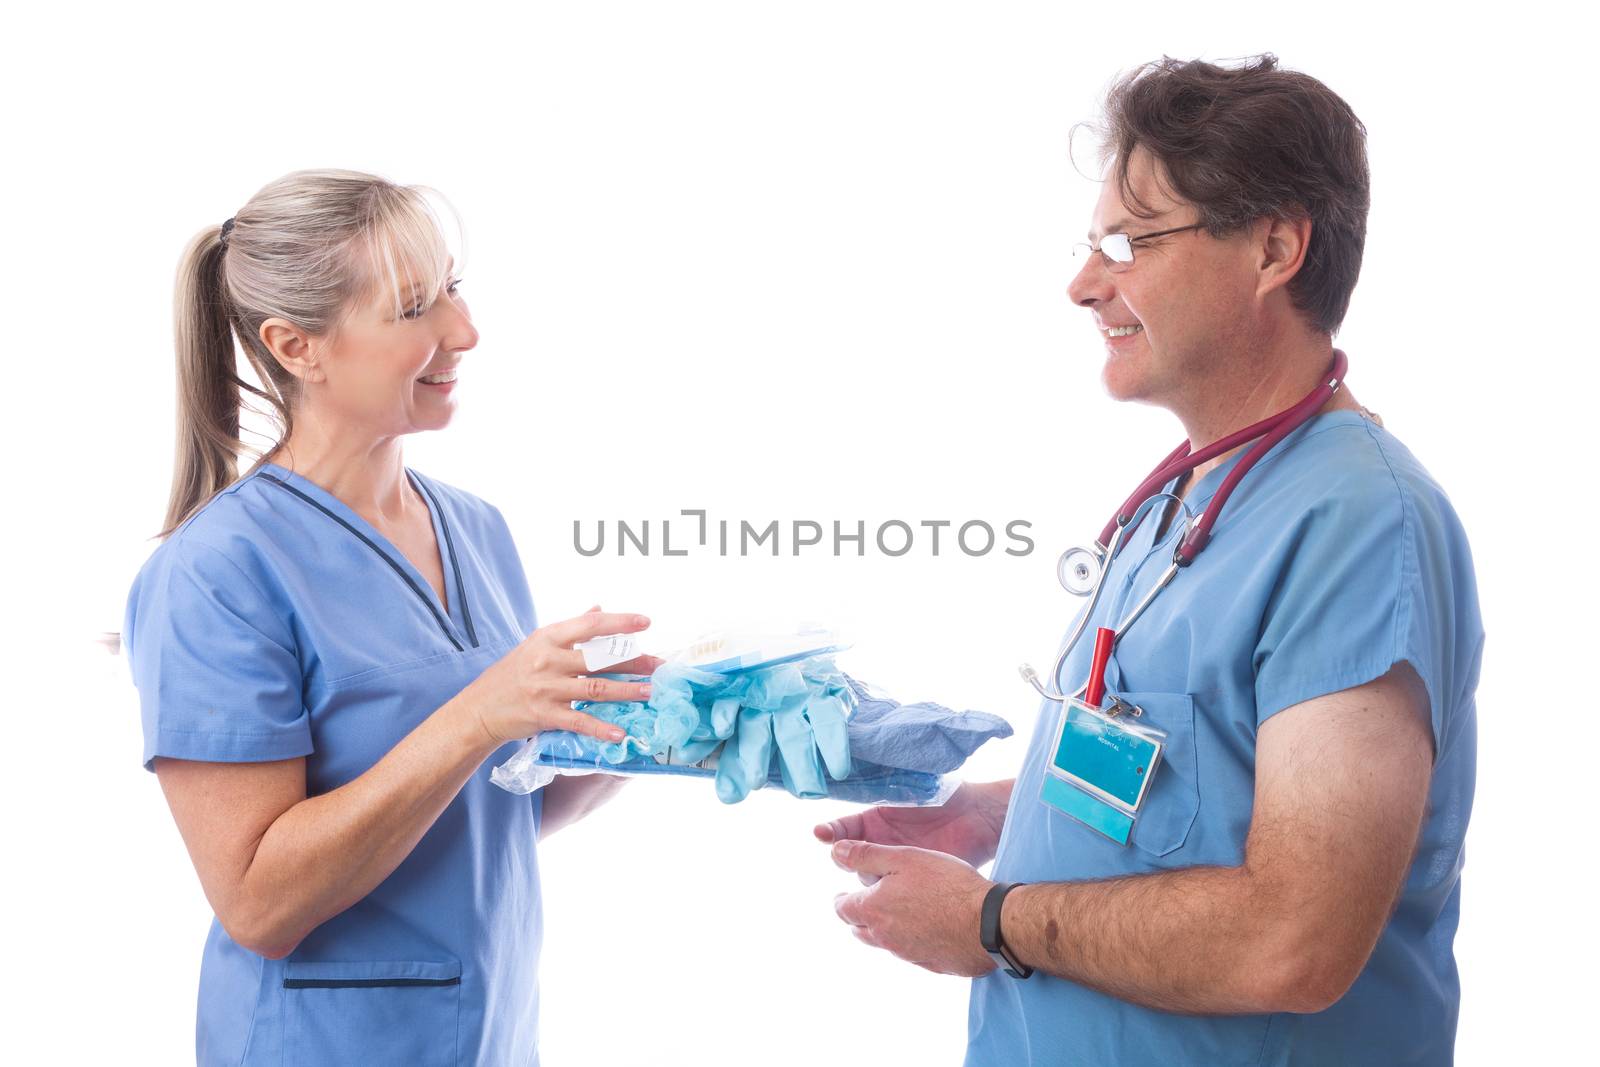 Hospital staff hands a PPE kit consisting of cull body coverall, N95 respirator mask, gloves, hair cover and foot covers to another nurse or doctor